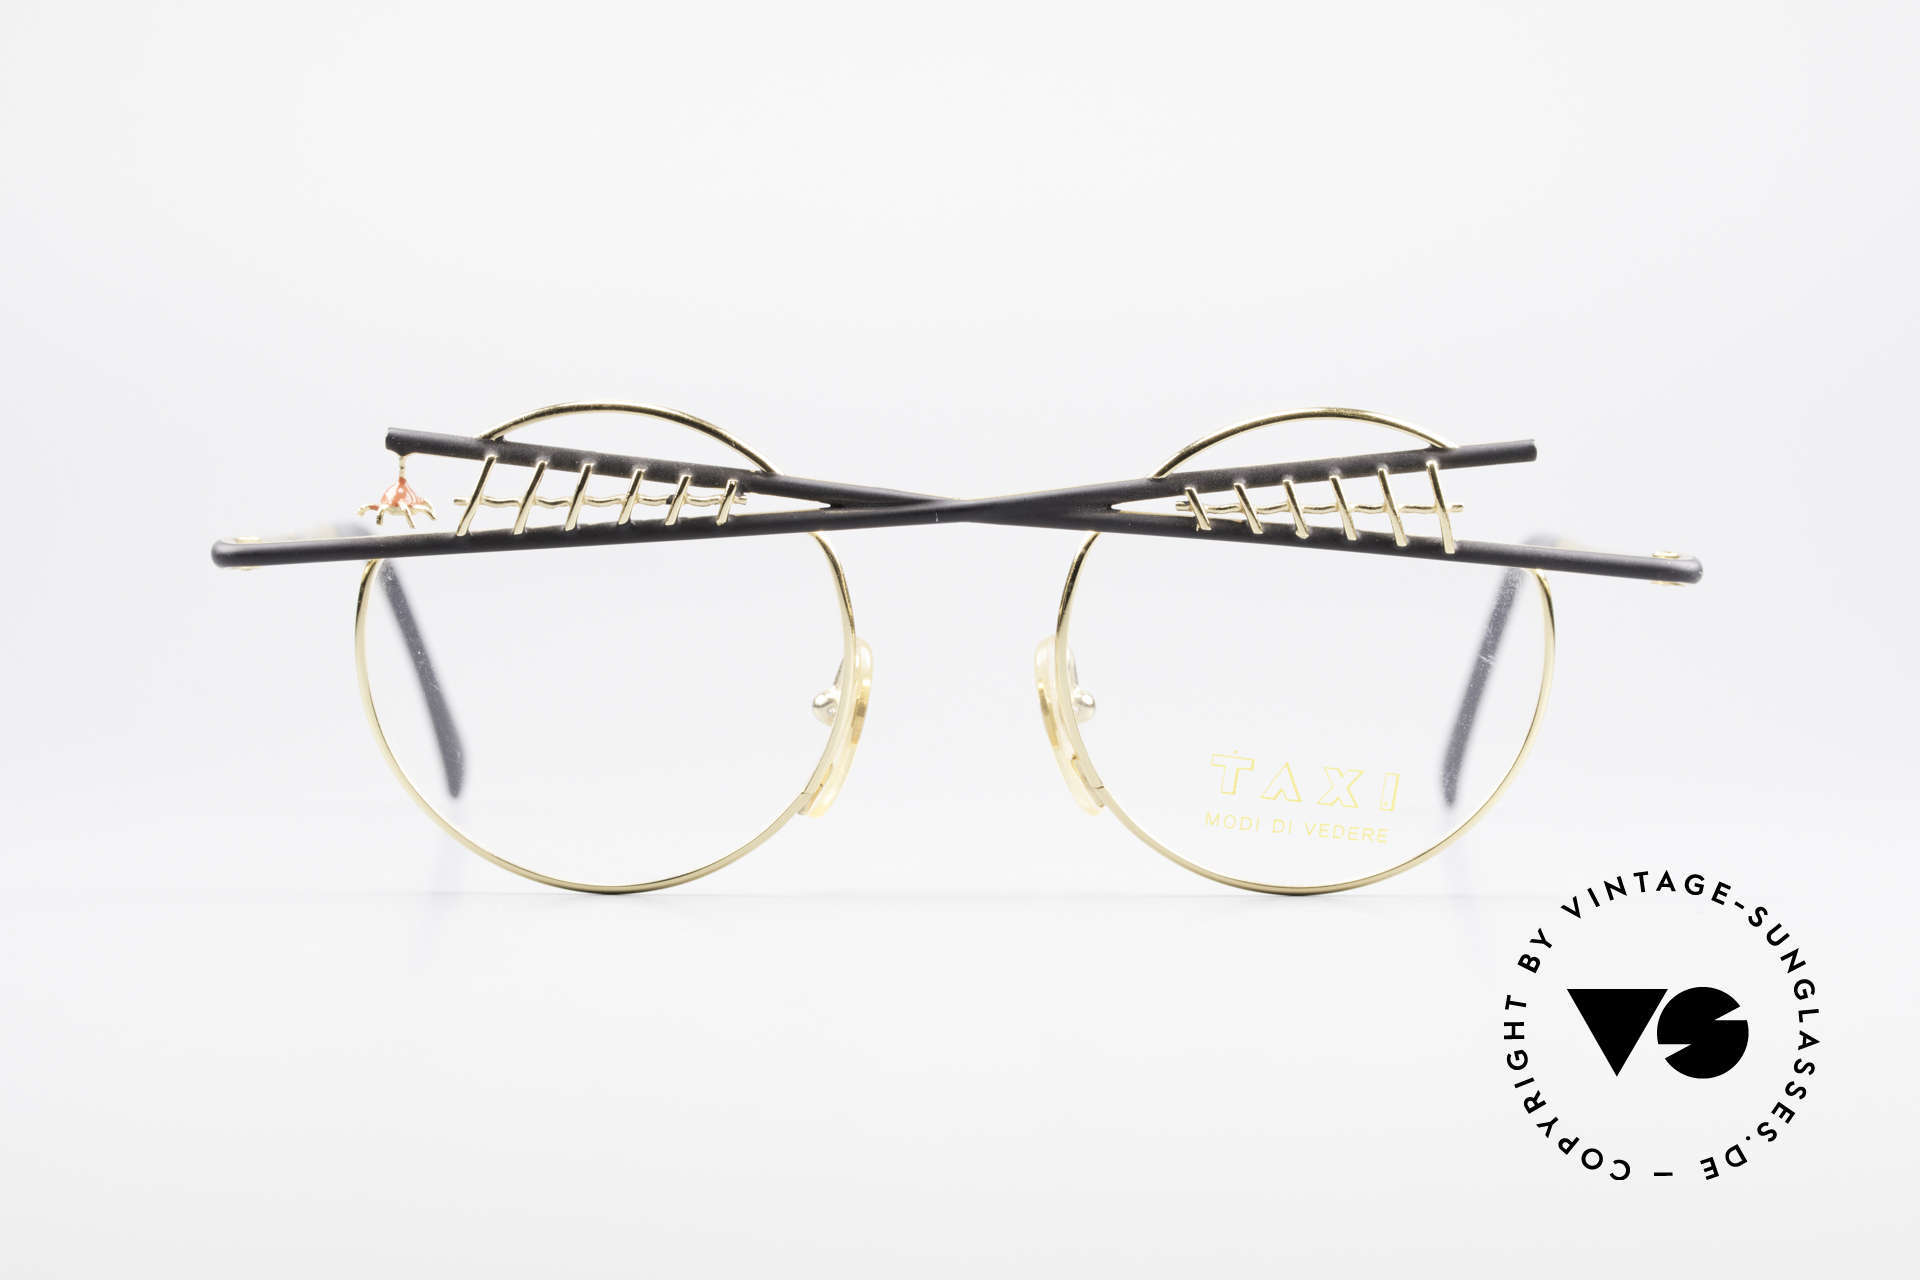 Taxi ST1 by Casanova The Jester Glasses Art Frame, distinctive Venetian design in style of the 18th century, Made for Men and Women